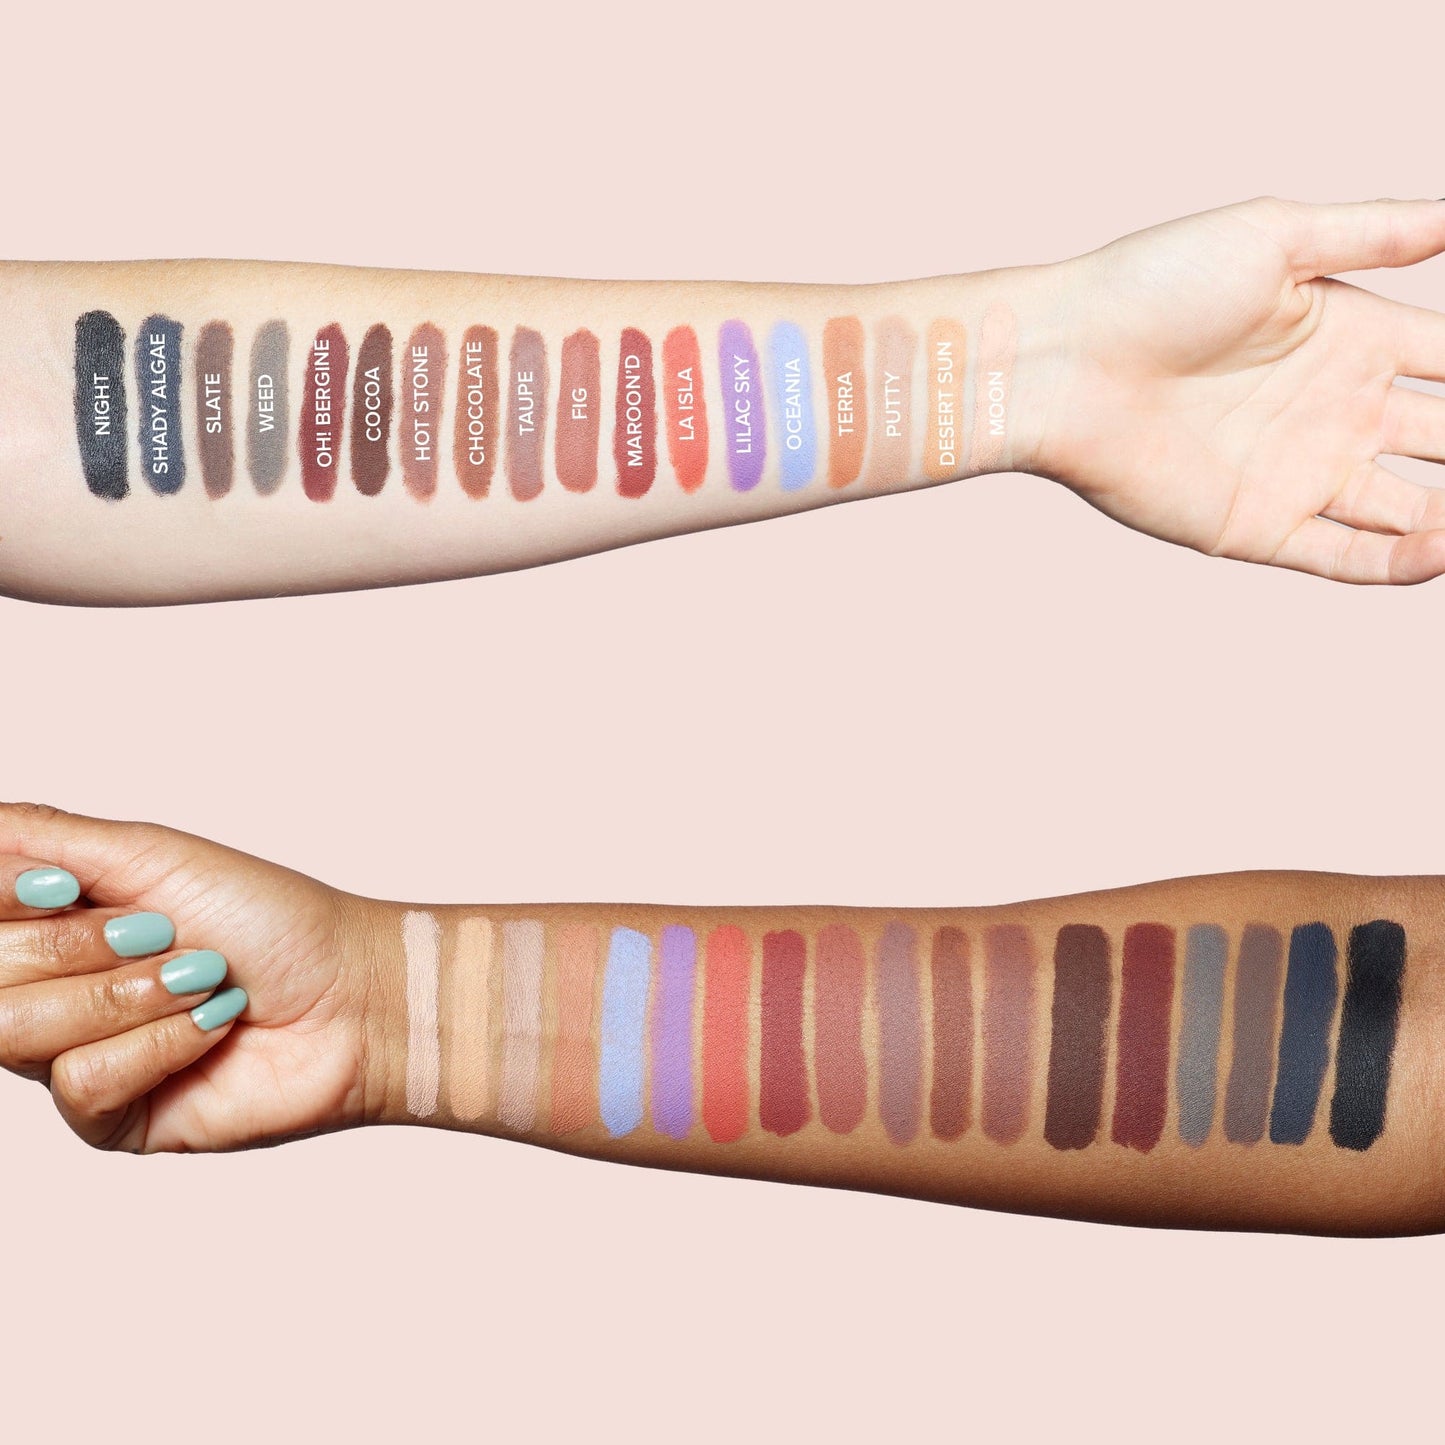 arms with swatches of maroond and other Magnetic Eye Color shades